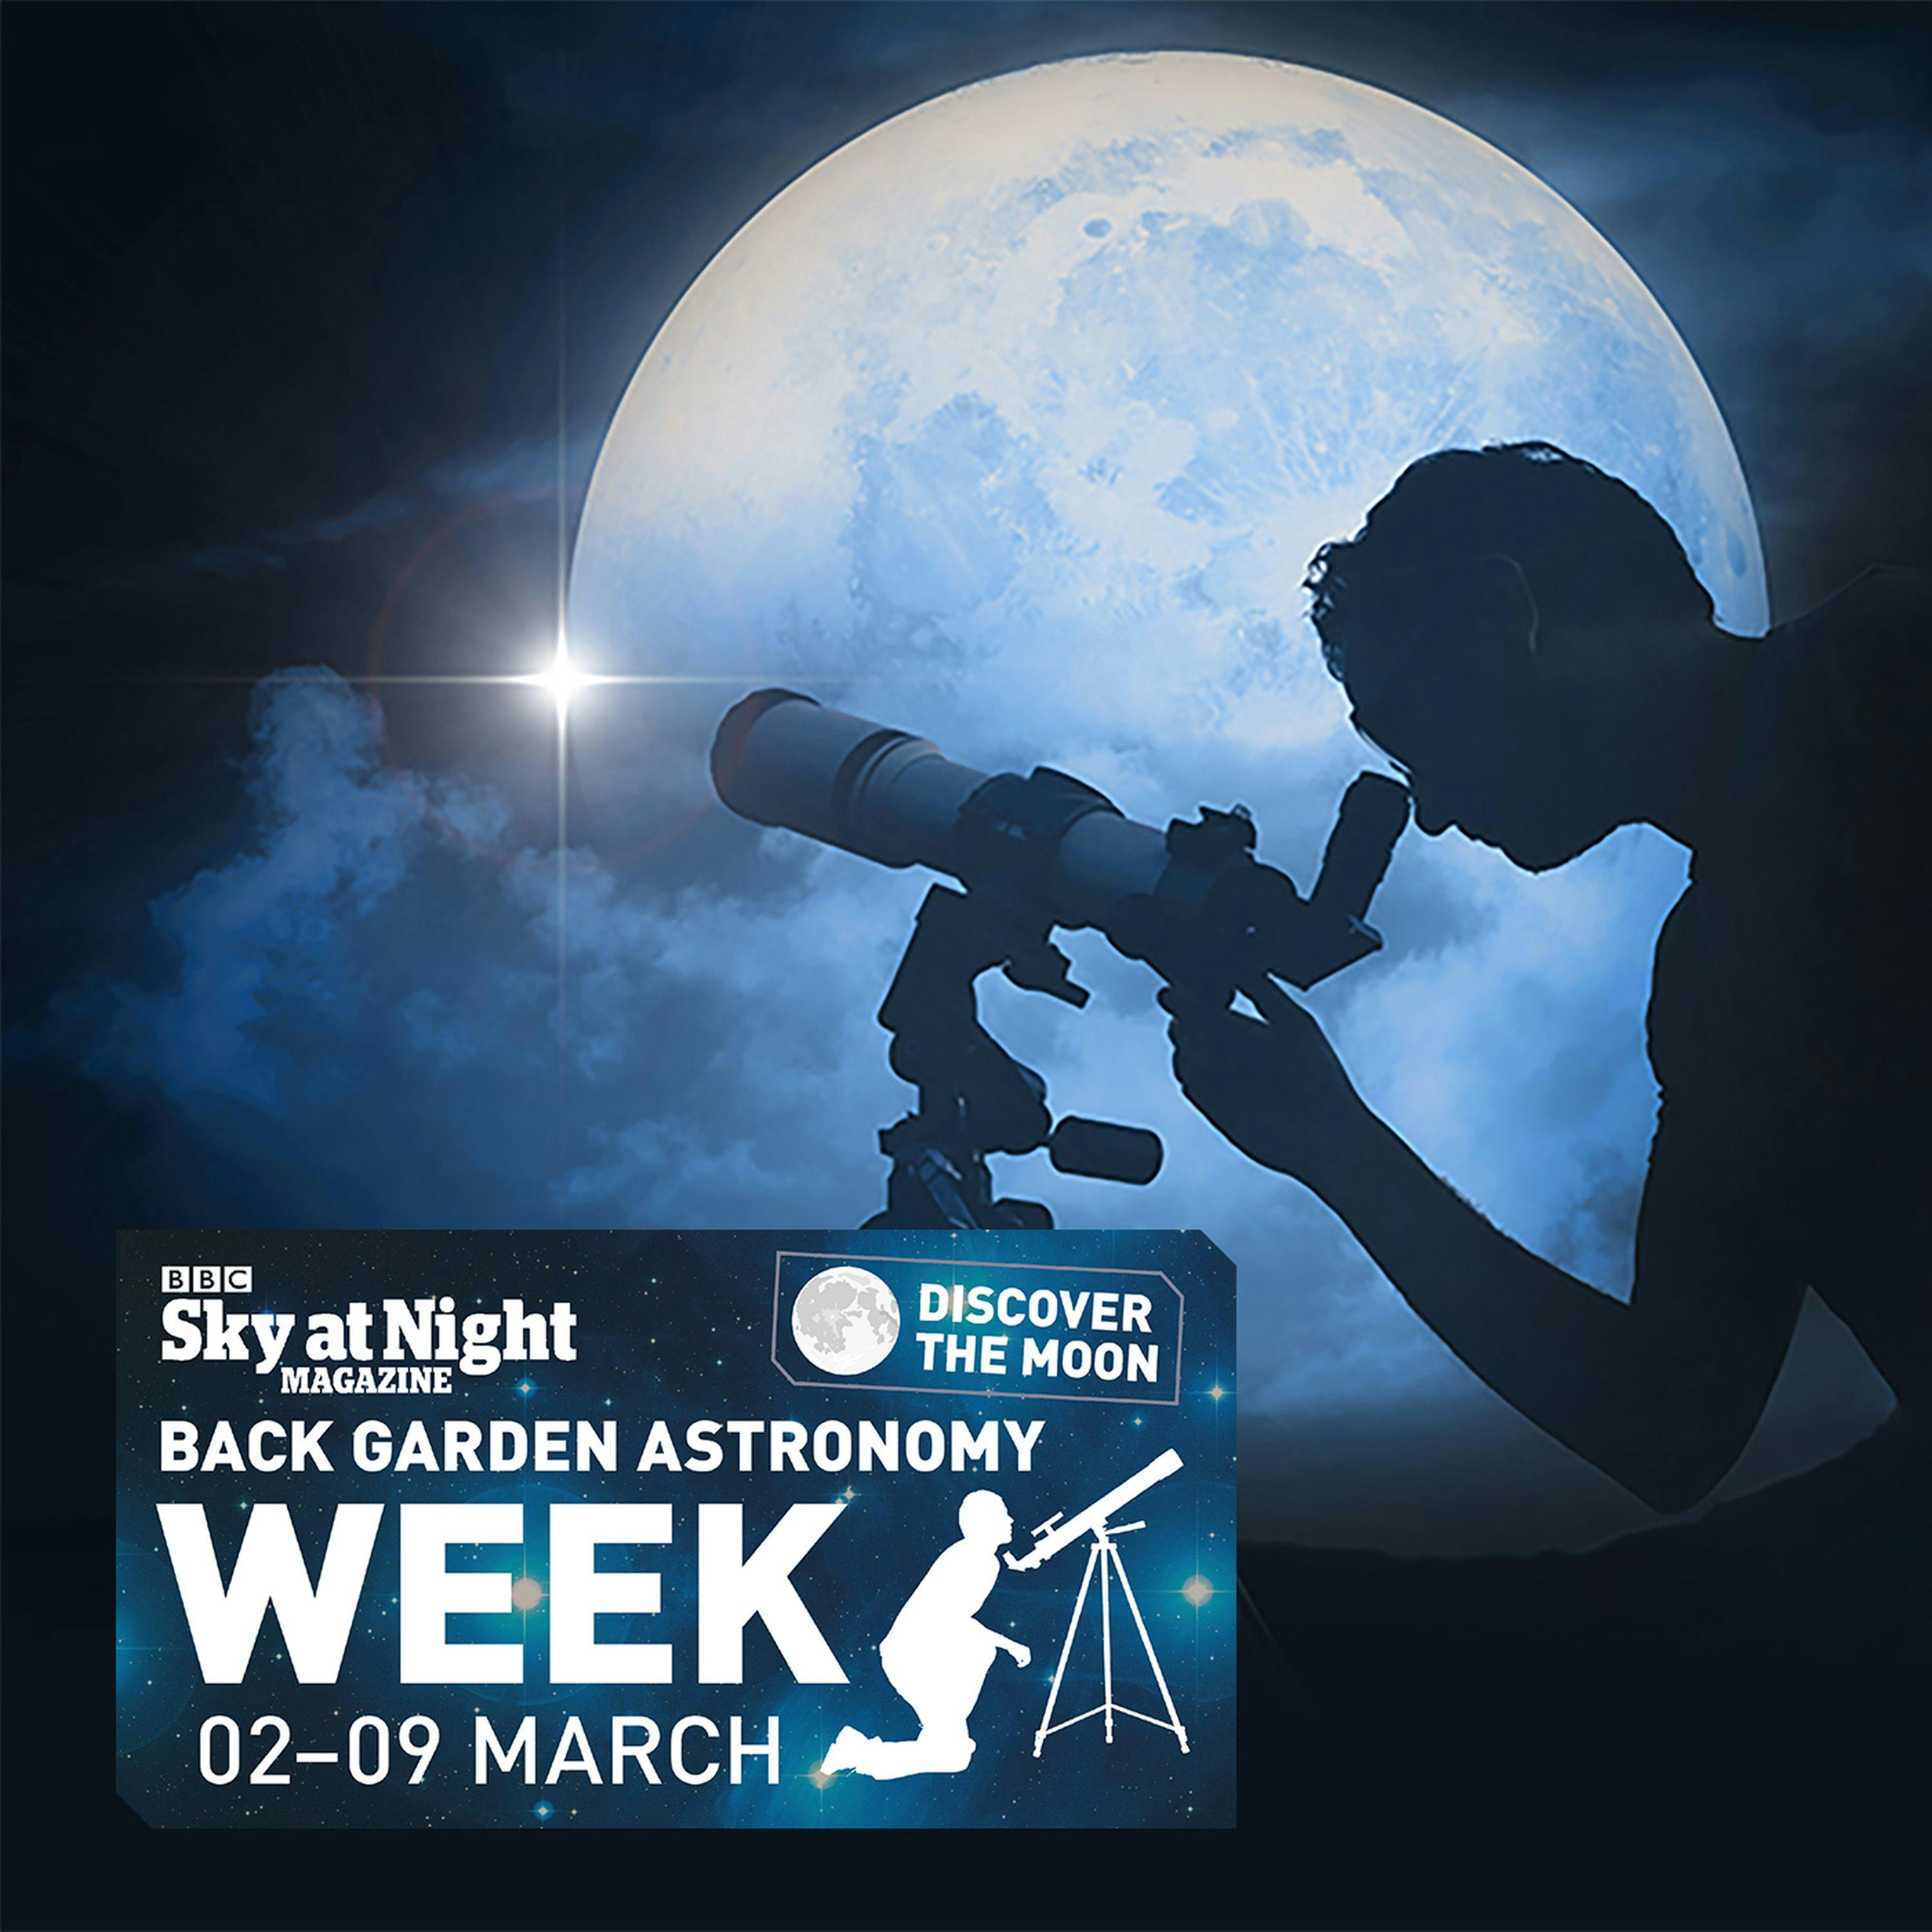 Day Four – Back Garden Astronomy Week: The Moon